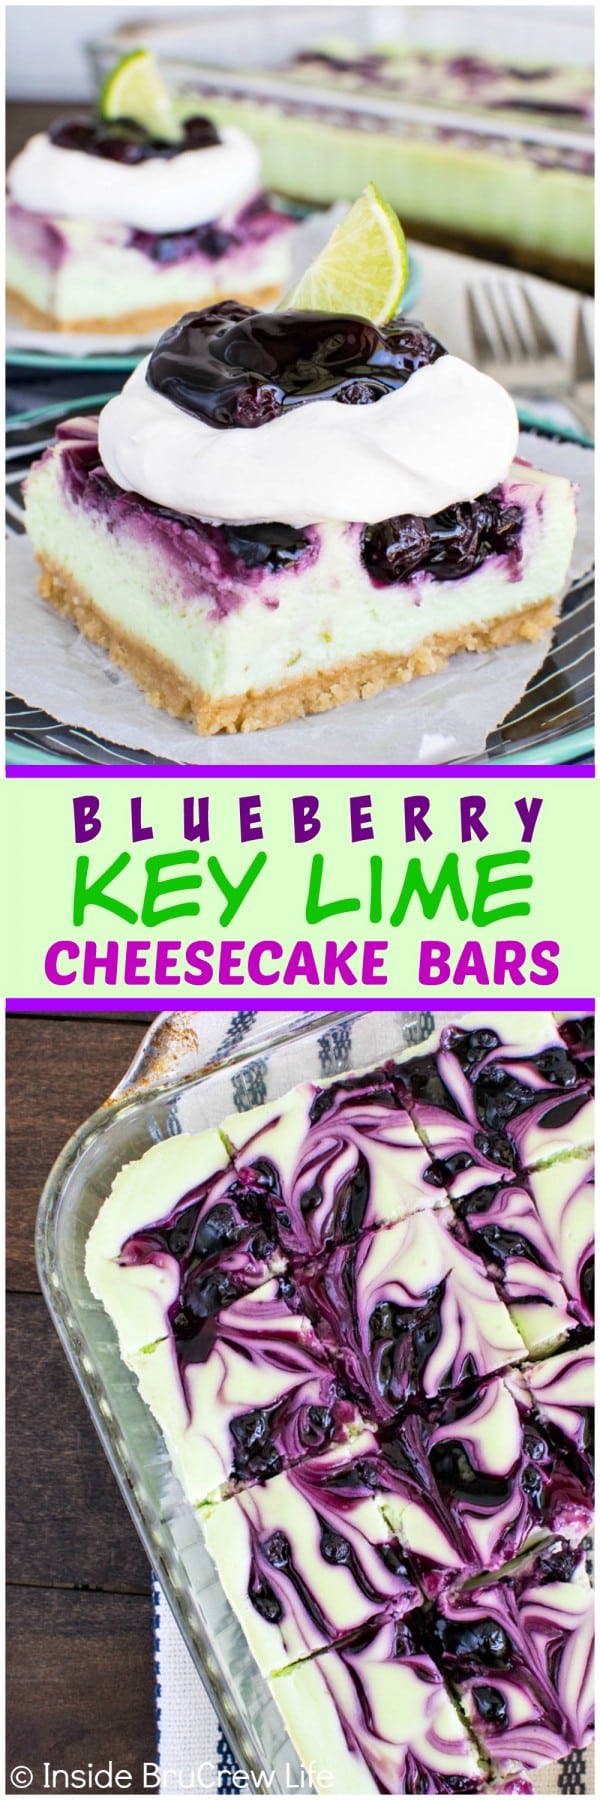 Blueberry Key Lime Cheesecake Bars - swirls of pie filling make these creamy citrus bars a fun summer dessert. Make this awesome recipe for parties and picnics. #cheesecake #blueberry #piefilling #cheesecakebars #keylime #summerdesserts